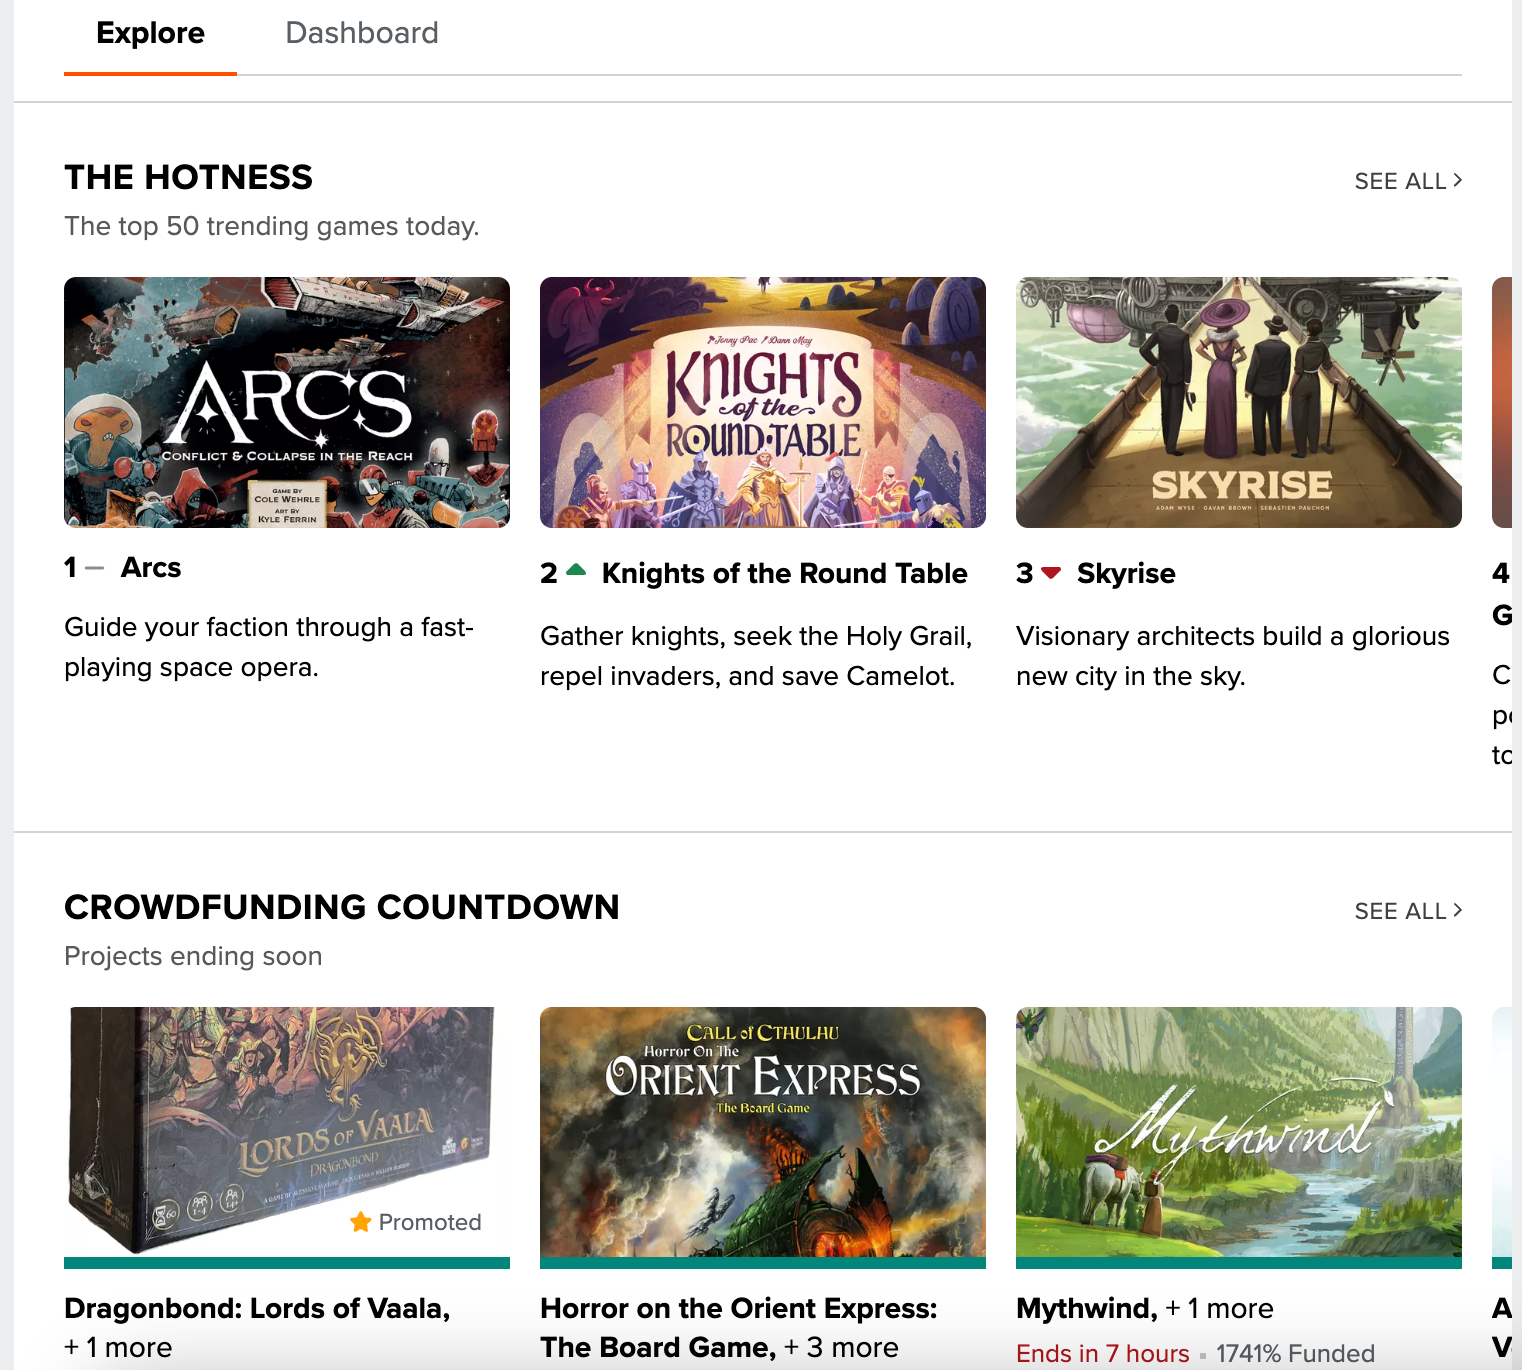 A screenshot of the front page of boardgamegeek.com, showing two information modules with pictures: "The Hotness" and "Crowdfunding Countdown".